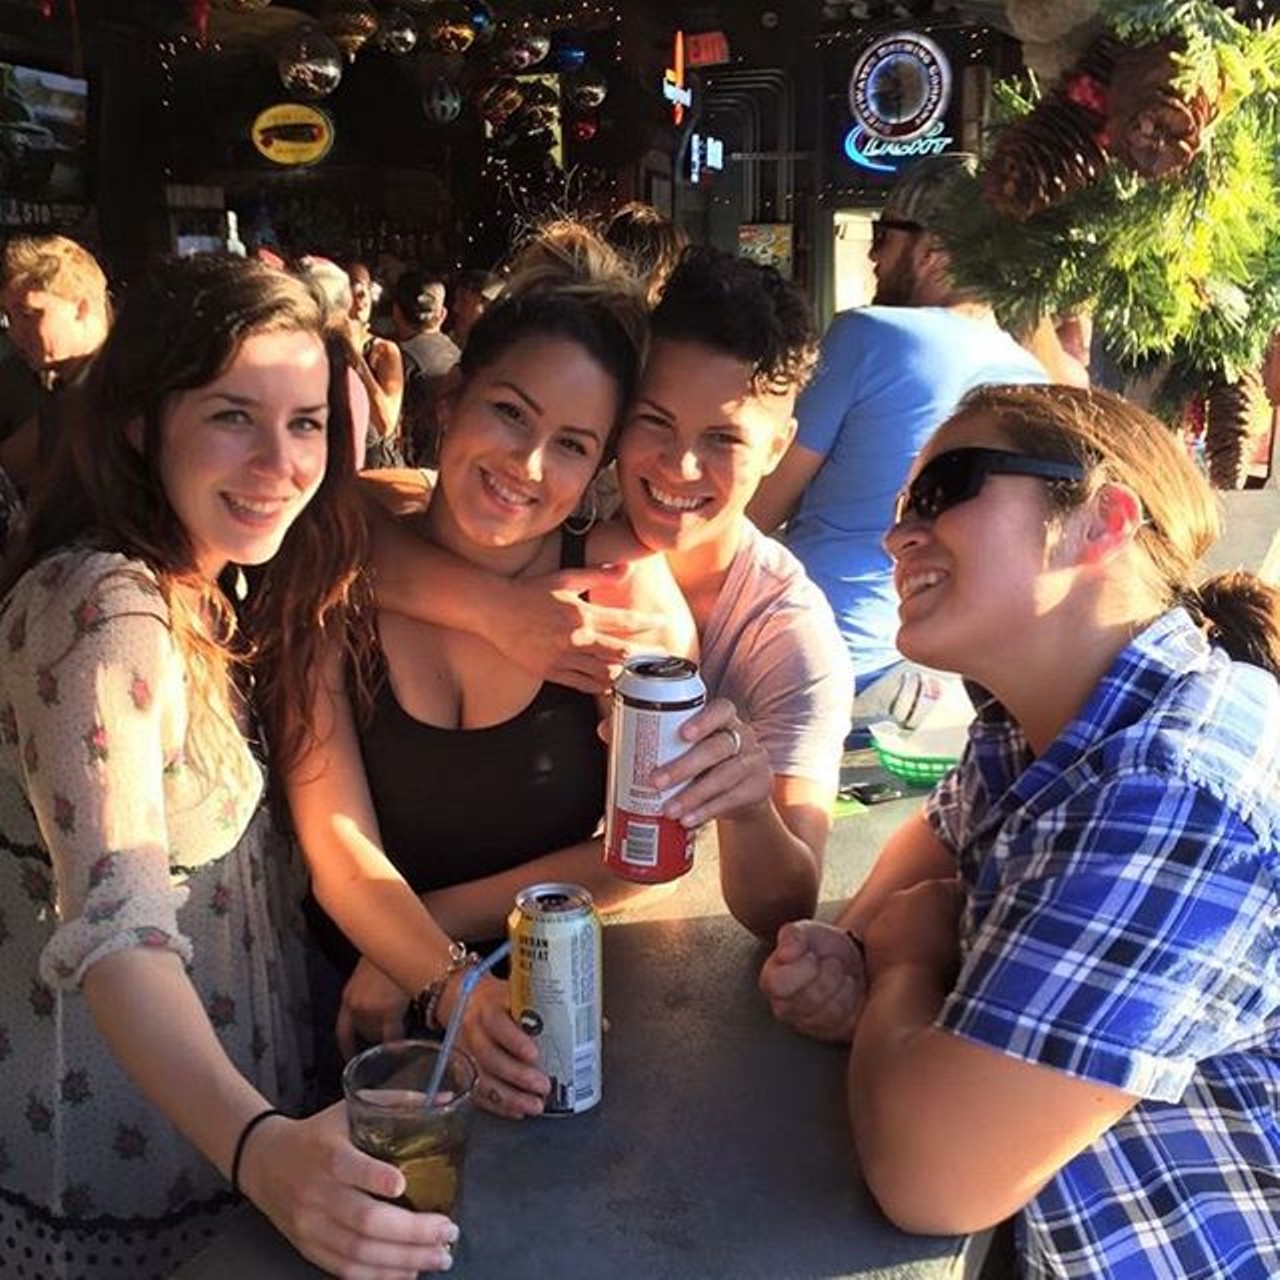 The Lucky Lure
1427 N Orange Ave, Orlando
407-250-6949
At the Lucky Lure it's like hanging out at seaside fish camp, but without leaving Orlando. Take advantage of specials like $5 off Smirnoff flavor of the month while enjoying some live music.Photo via michelle_fogelsanger on Instagram.